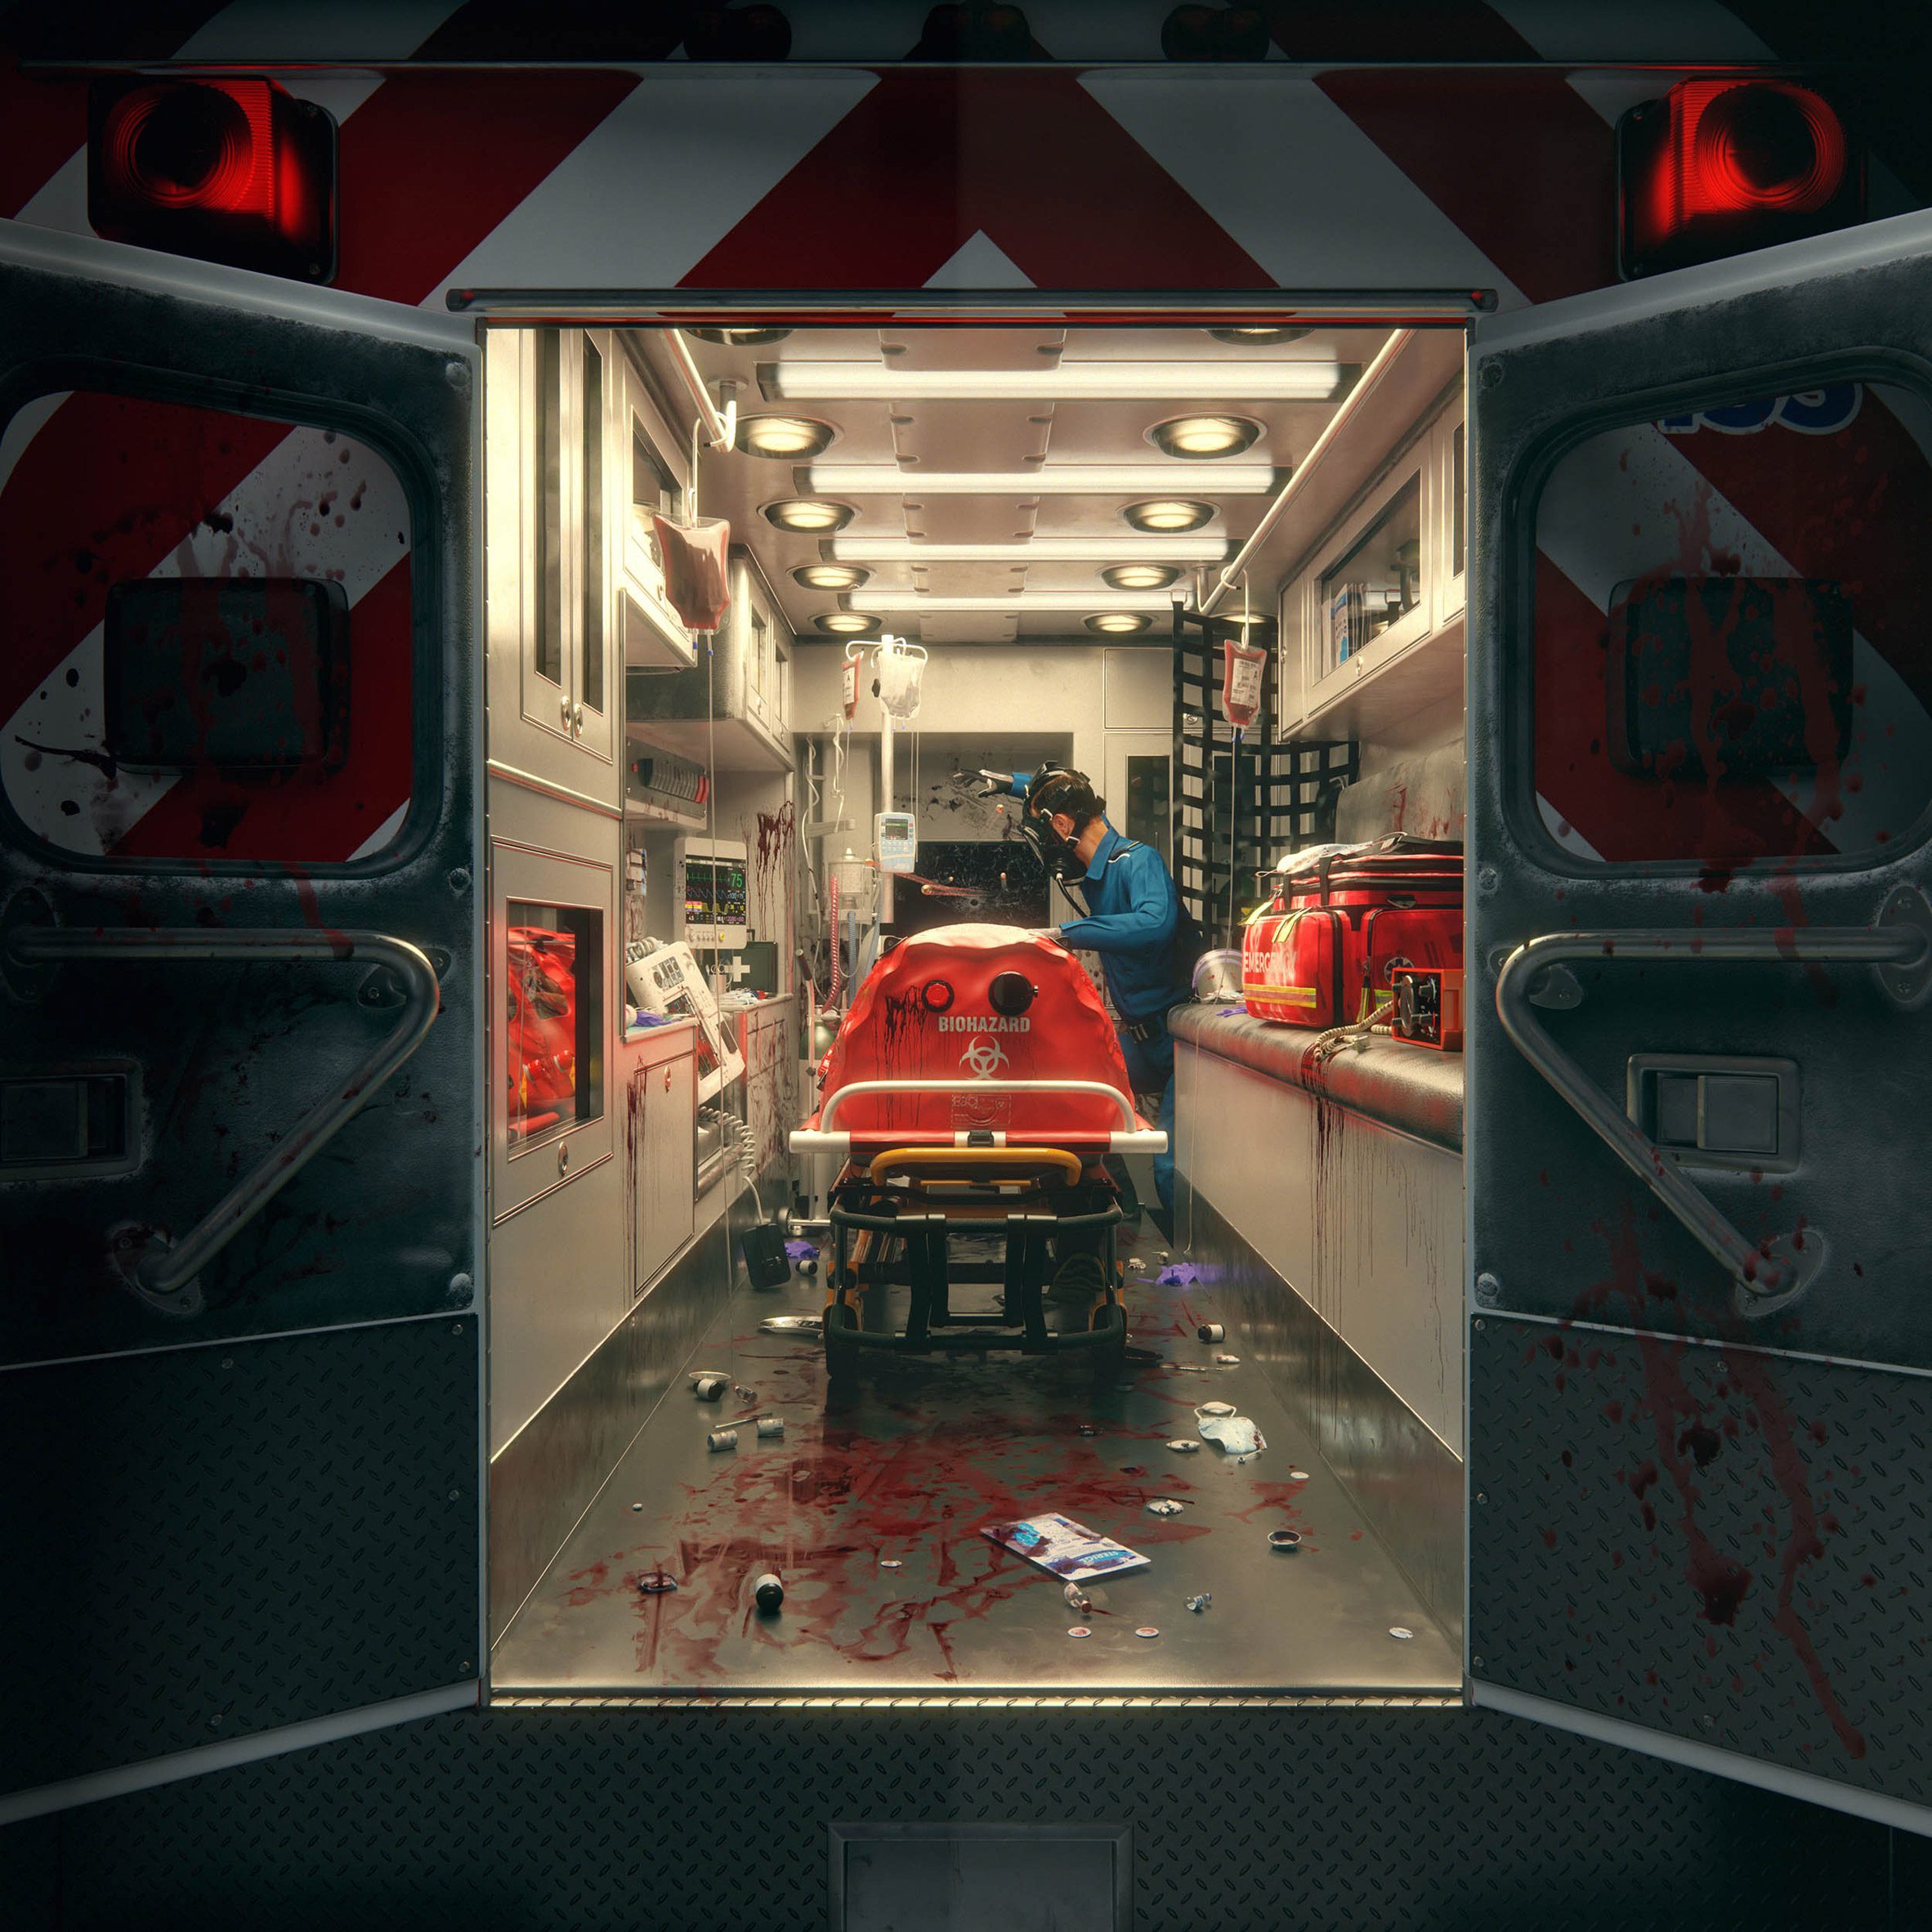 Ambulance scene in Colossus video by Factory Fifteen for Spitfire Audio